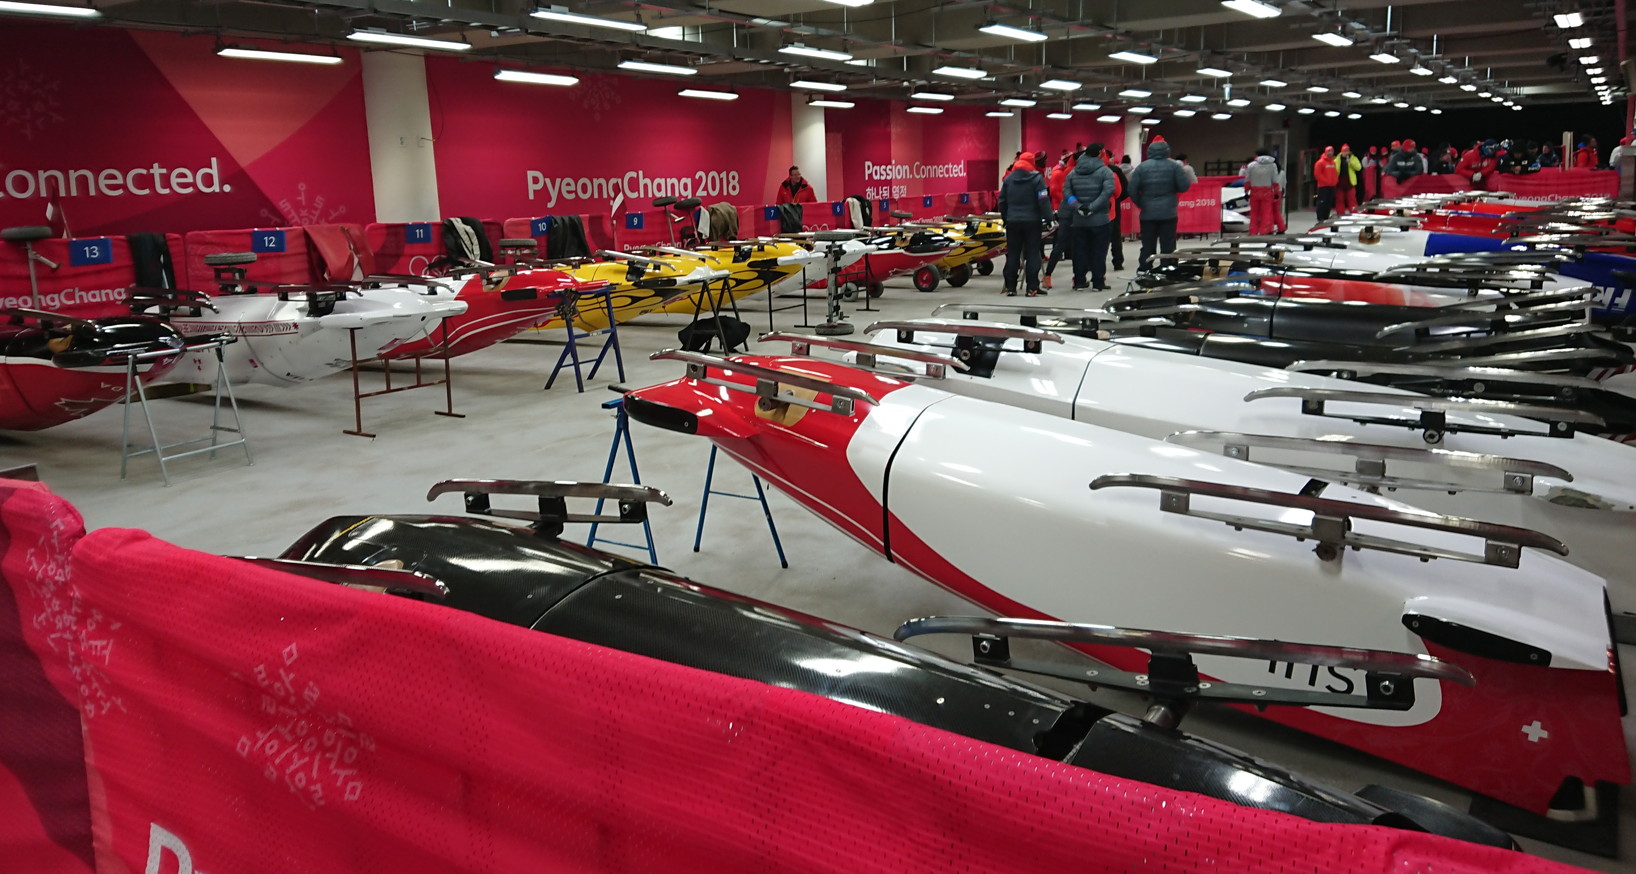 Enlarged view: "Parc fermé": Bobsleds, scrupulously material-tested and lined up waiting for the start